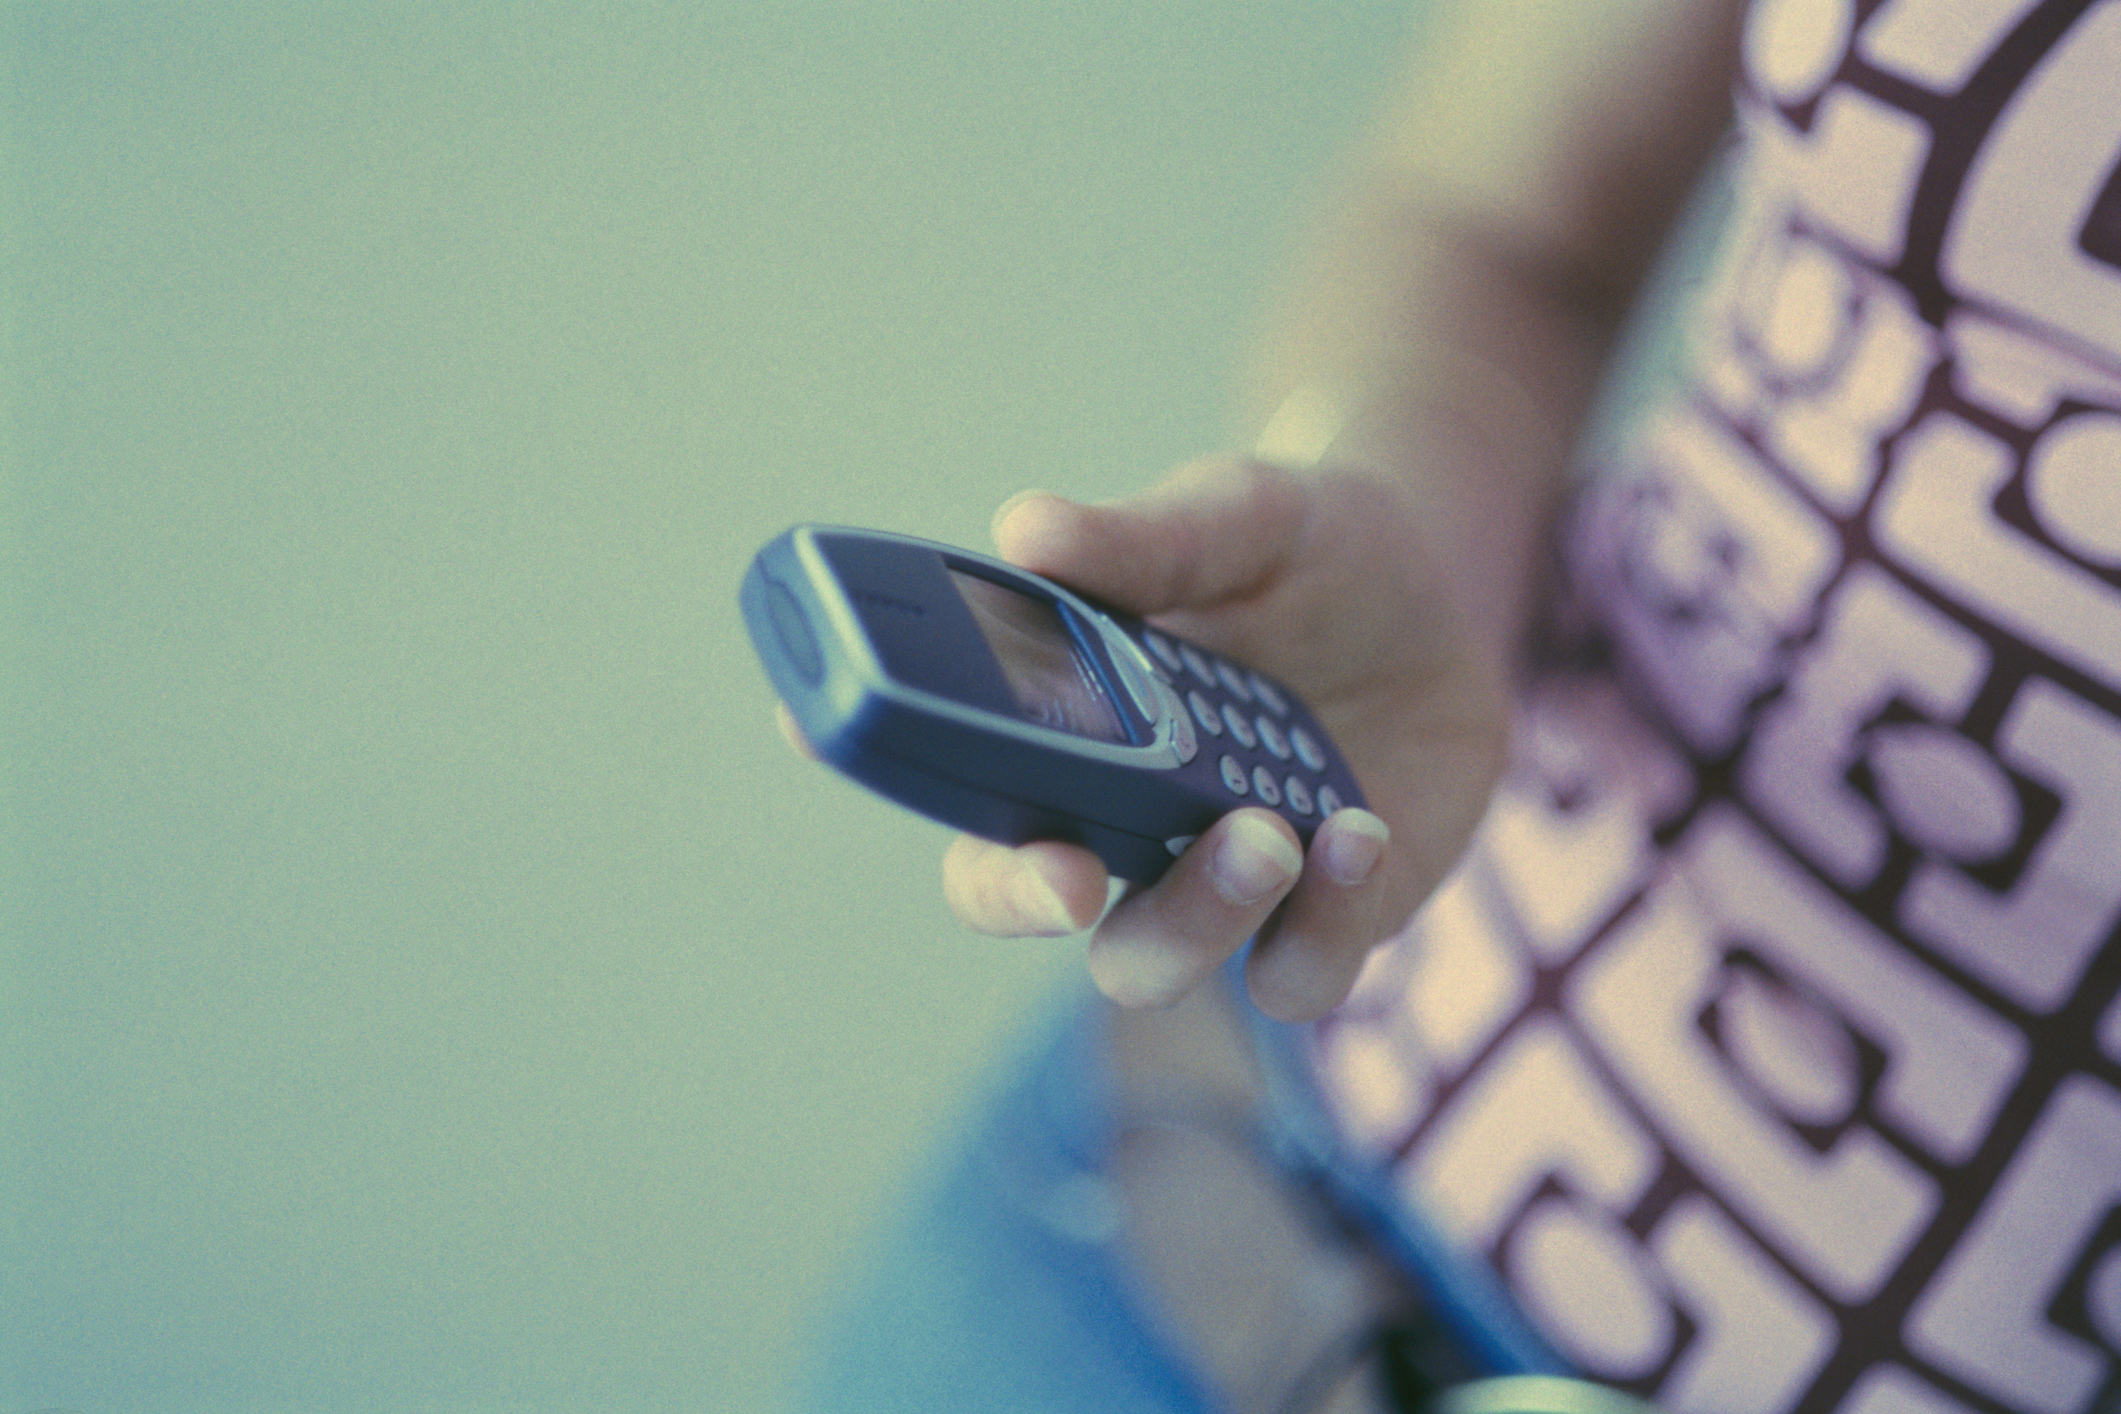 Person holding a vintage Nokia cell phone, indicative of early 2000s technology